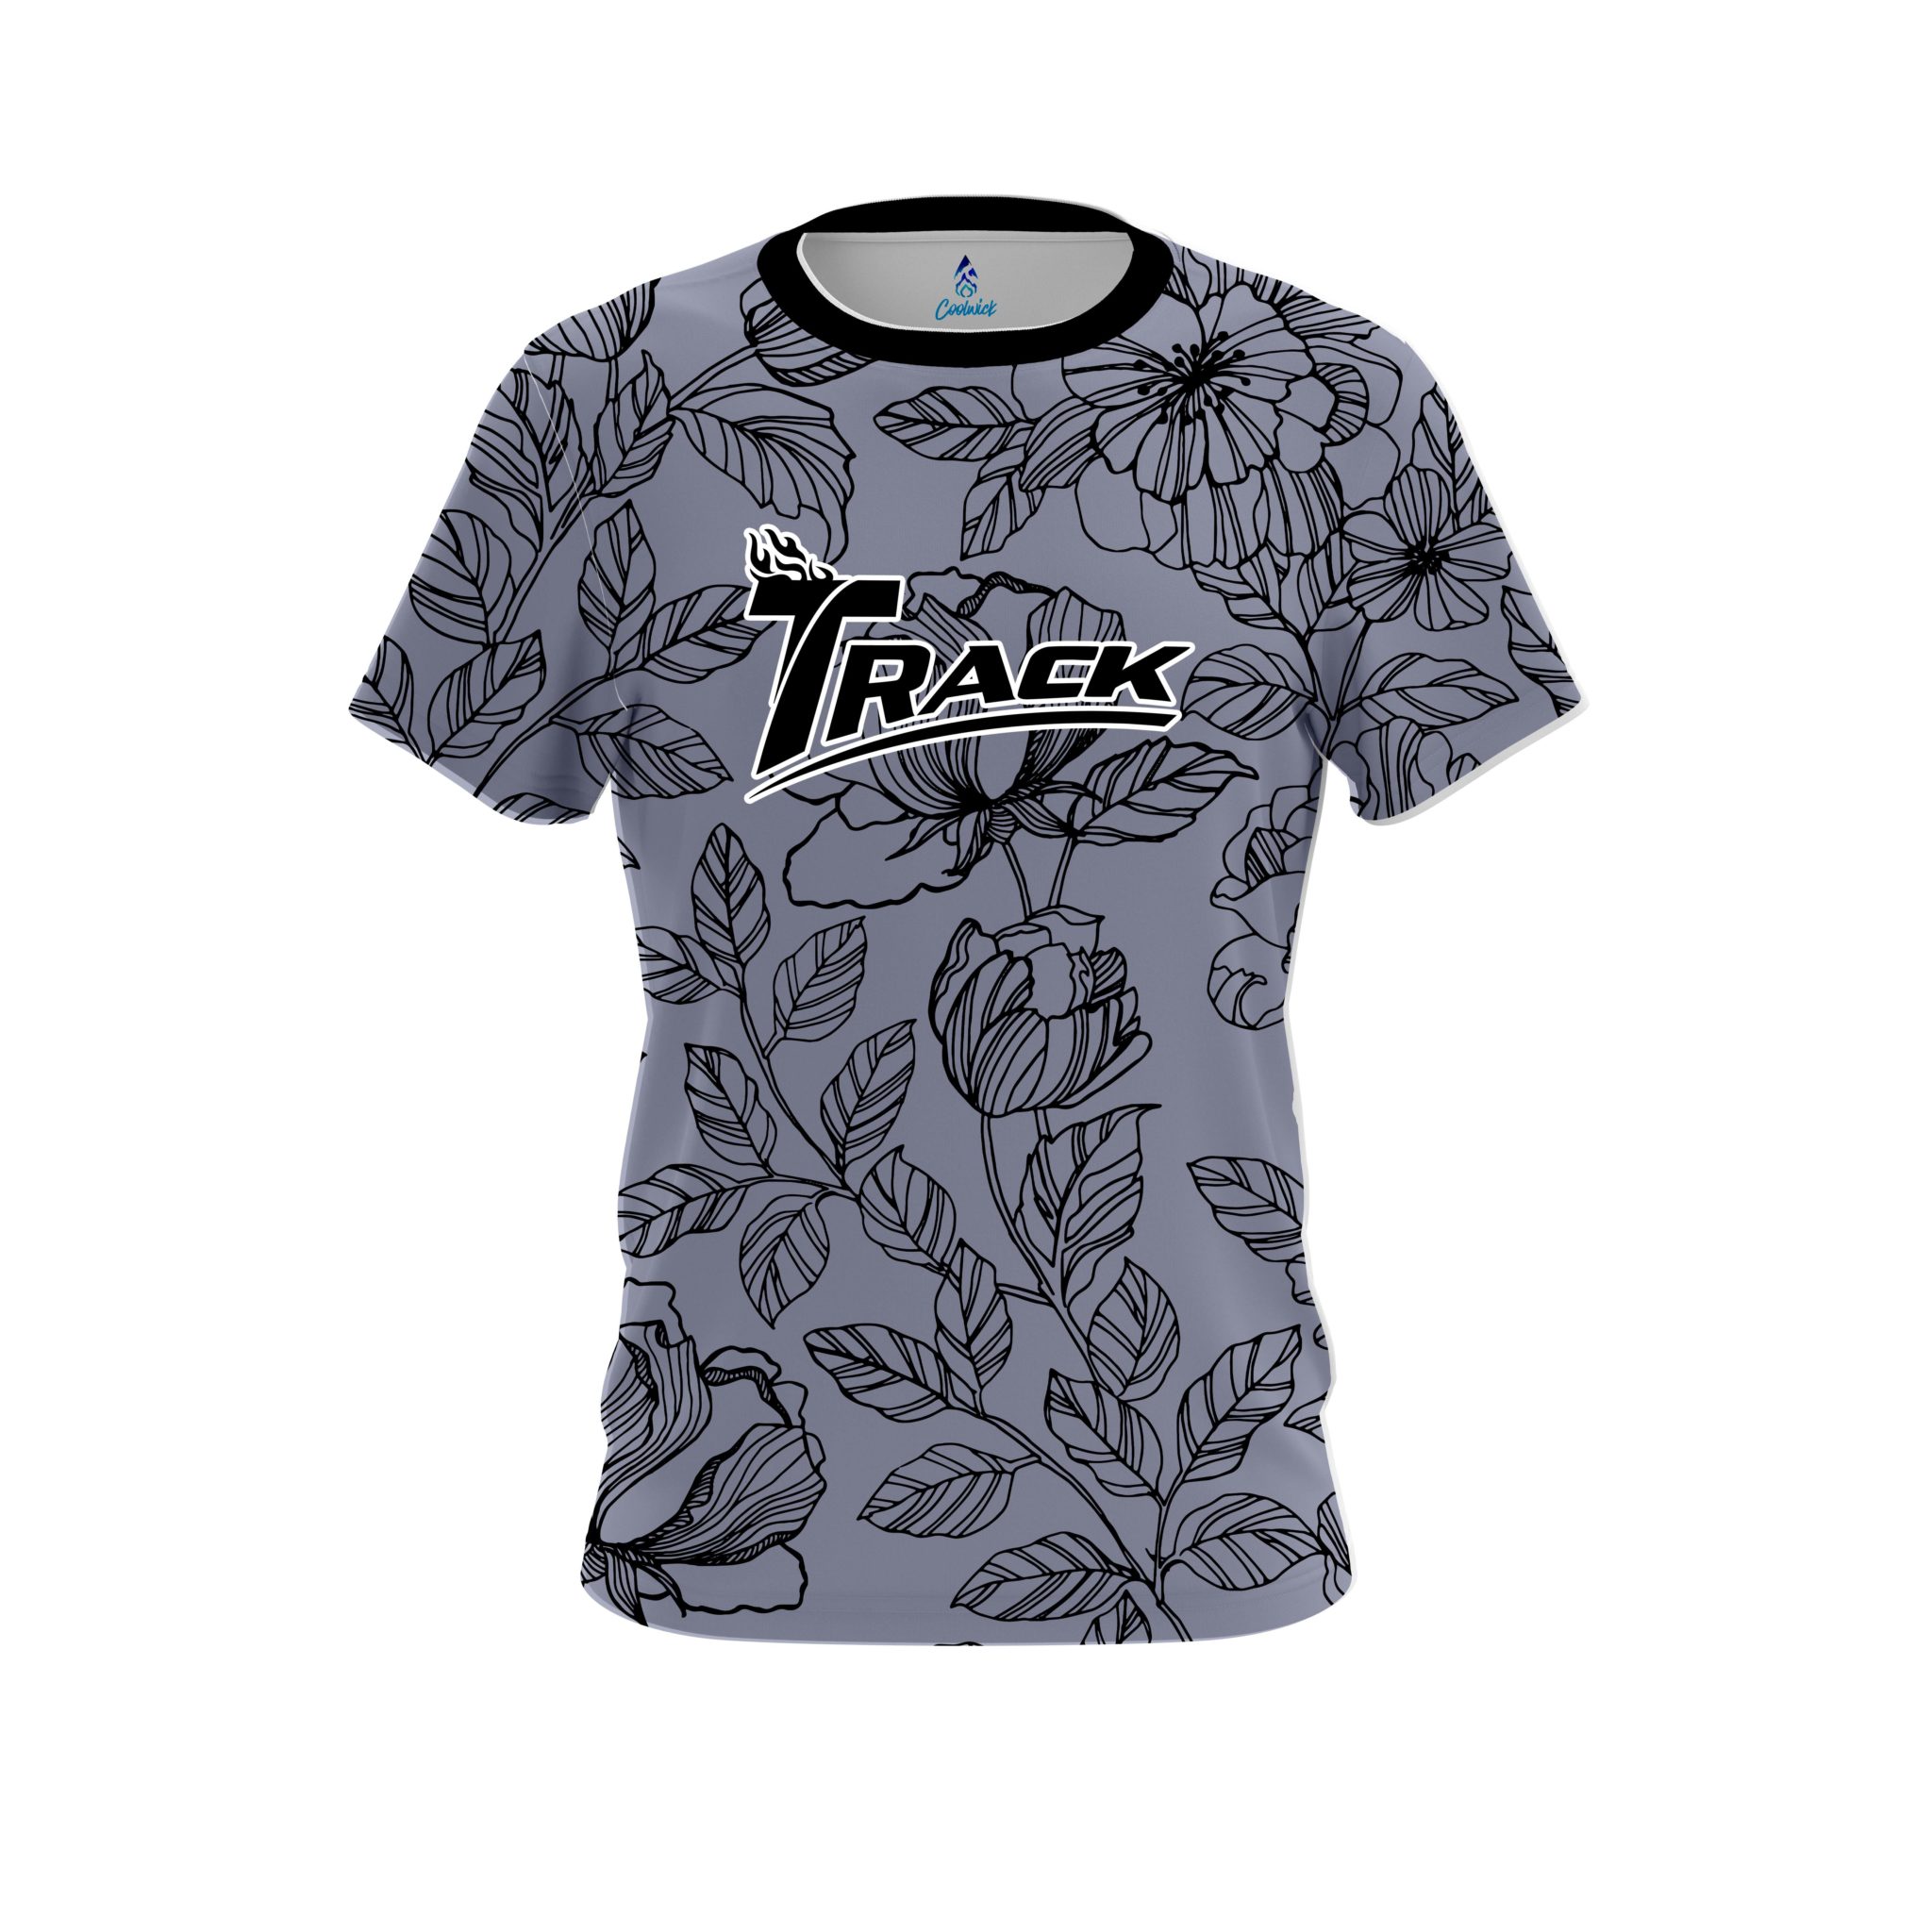 Track Flower Tattoo CoolWick Bowling Jersey